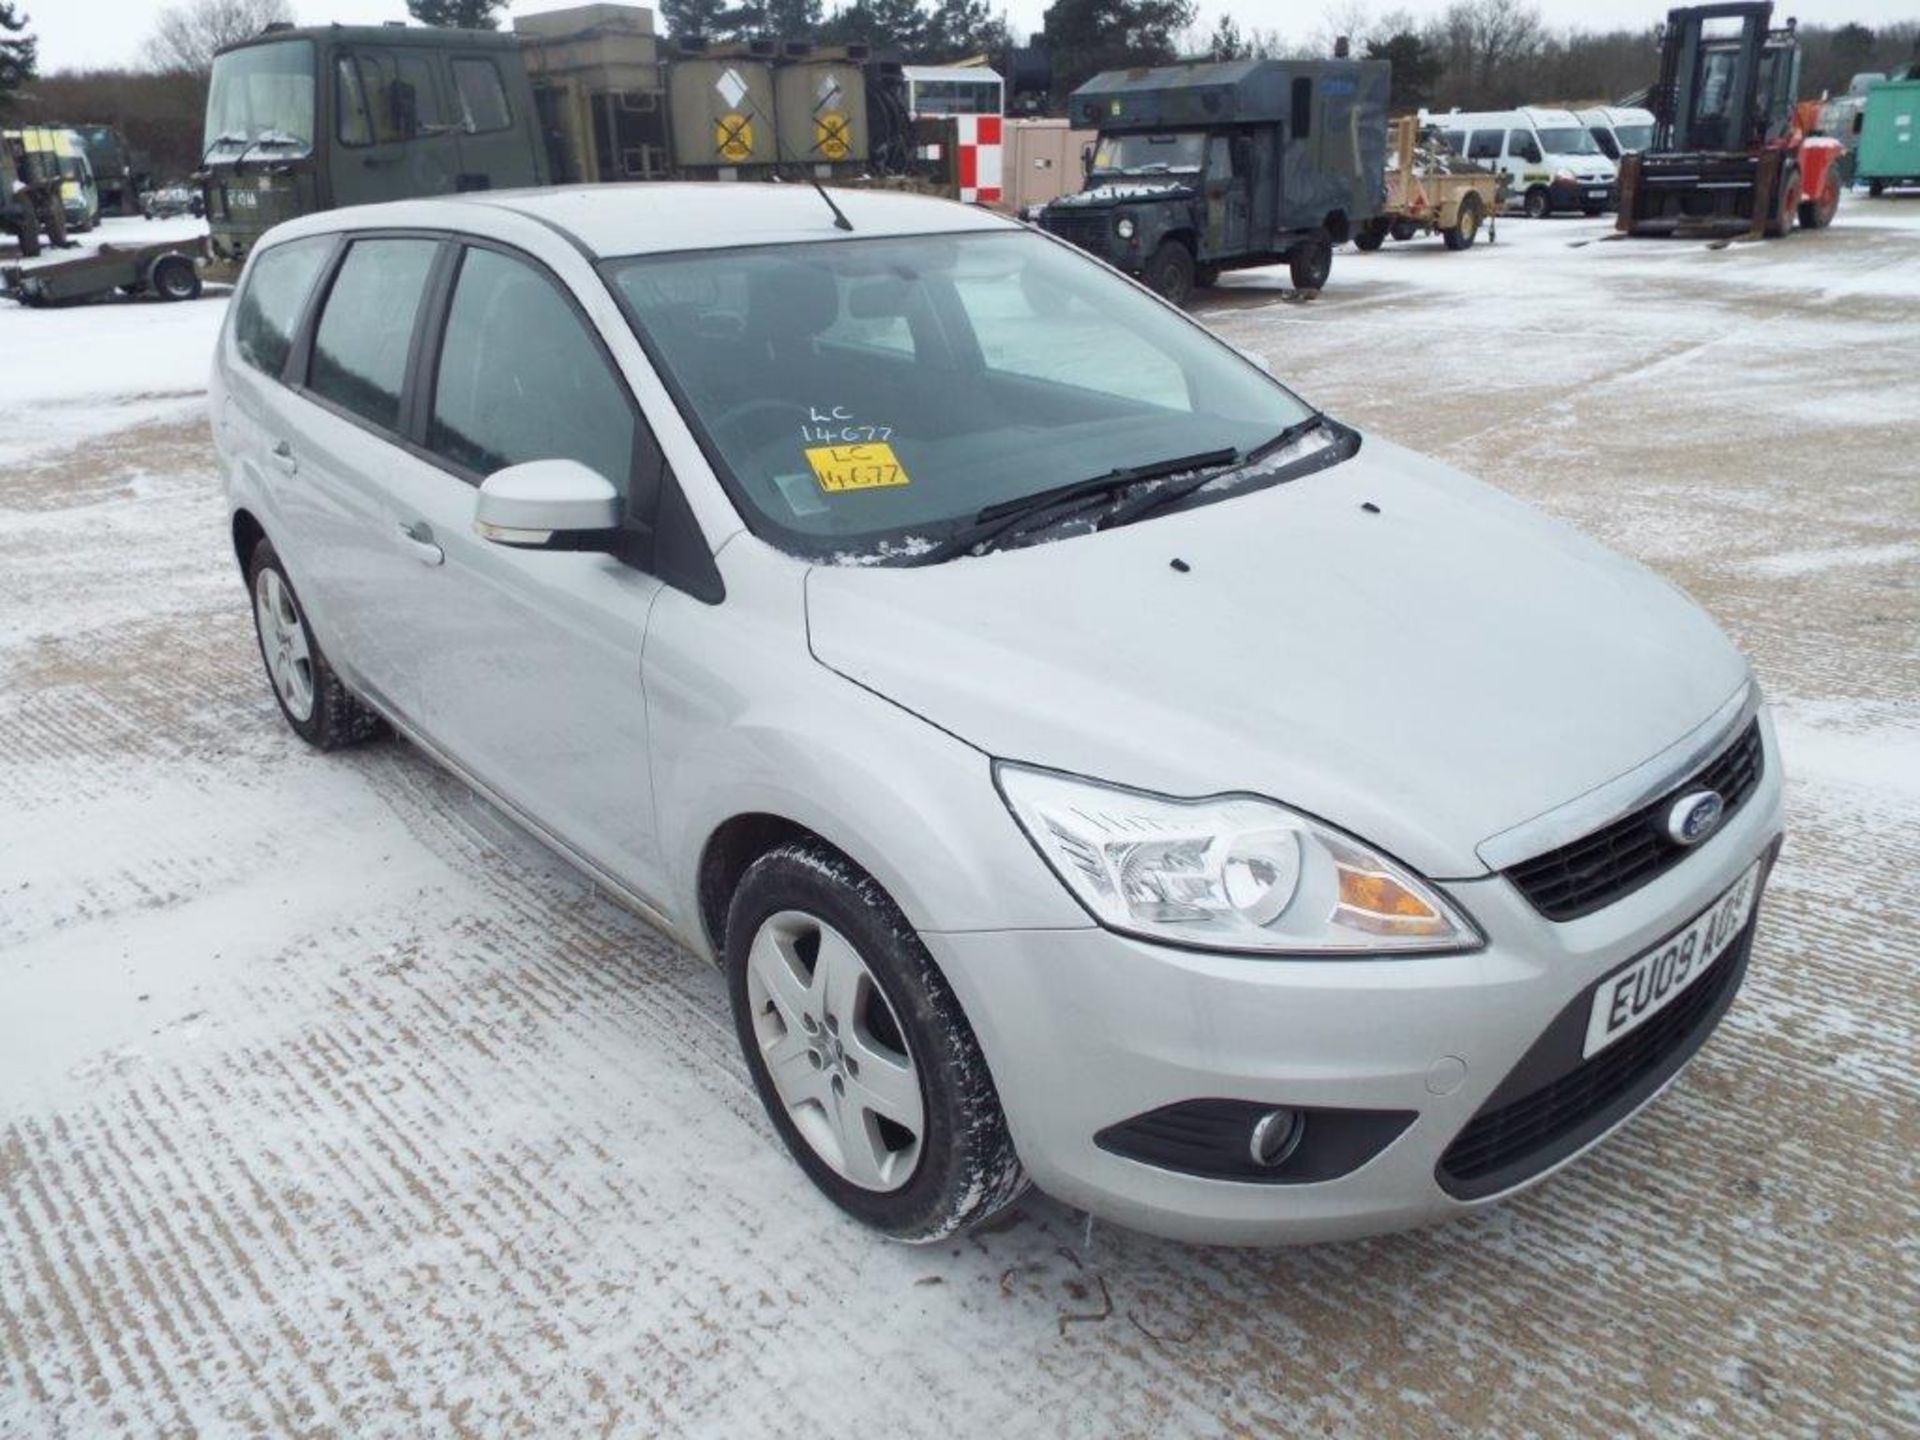 Ford Focus Style 1.8 TD 115 Estate - Only 25,174 Miles!